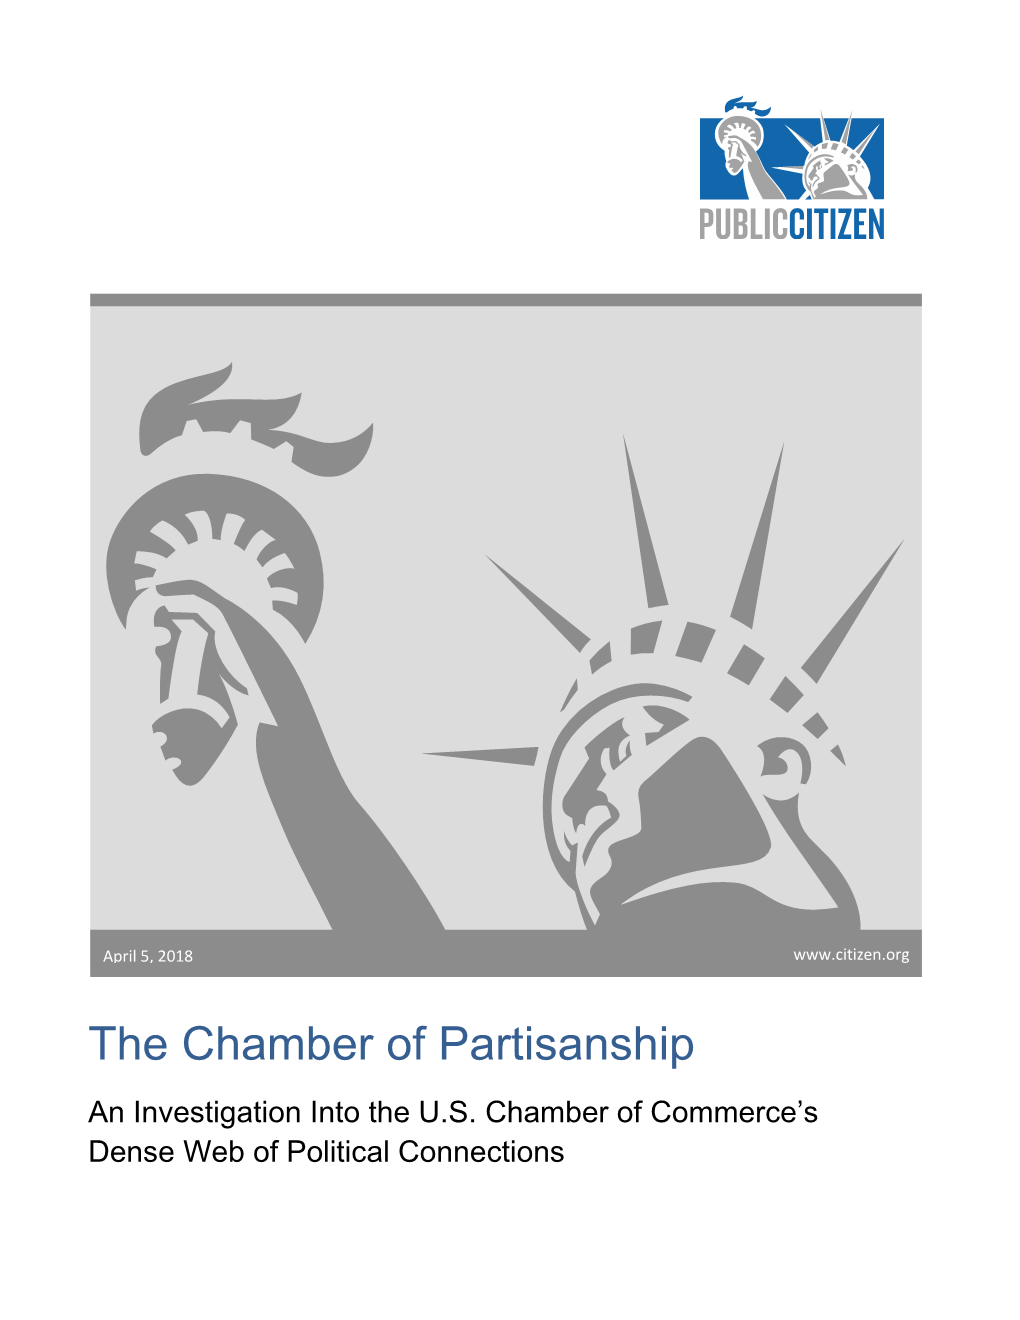 The Chamber of Partisanship an Investigation Into the U.S